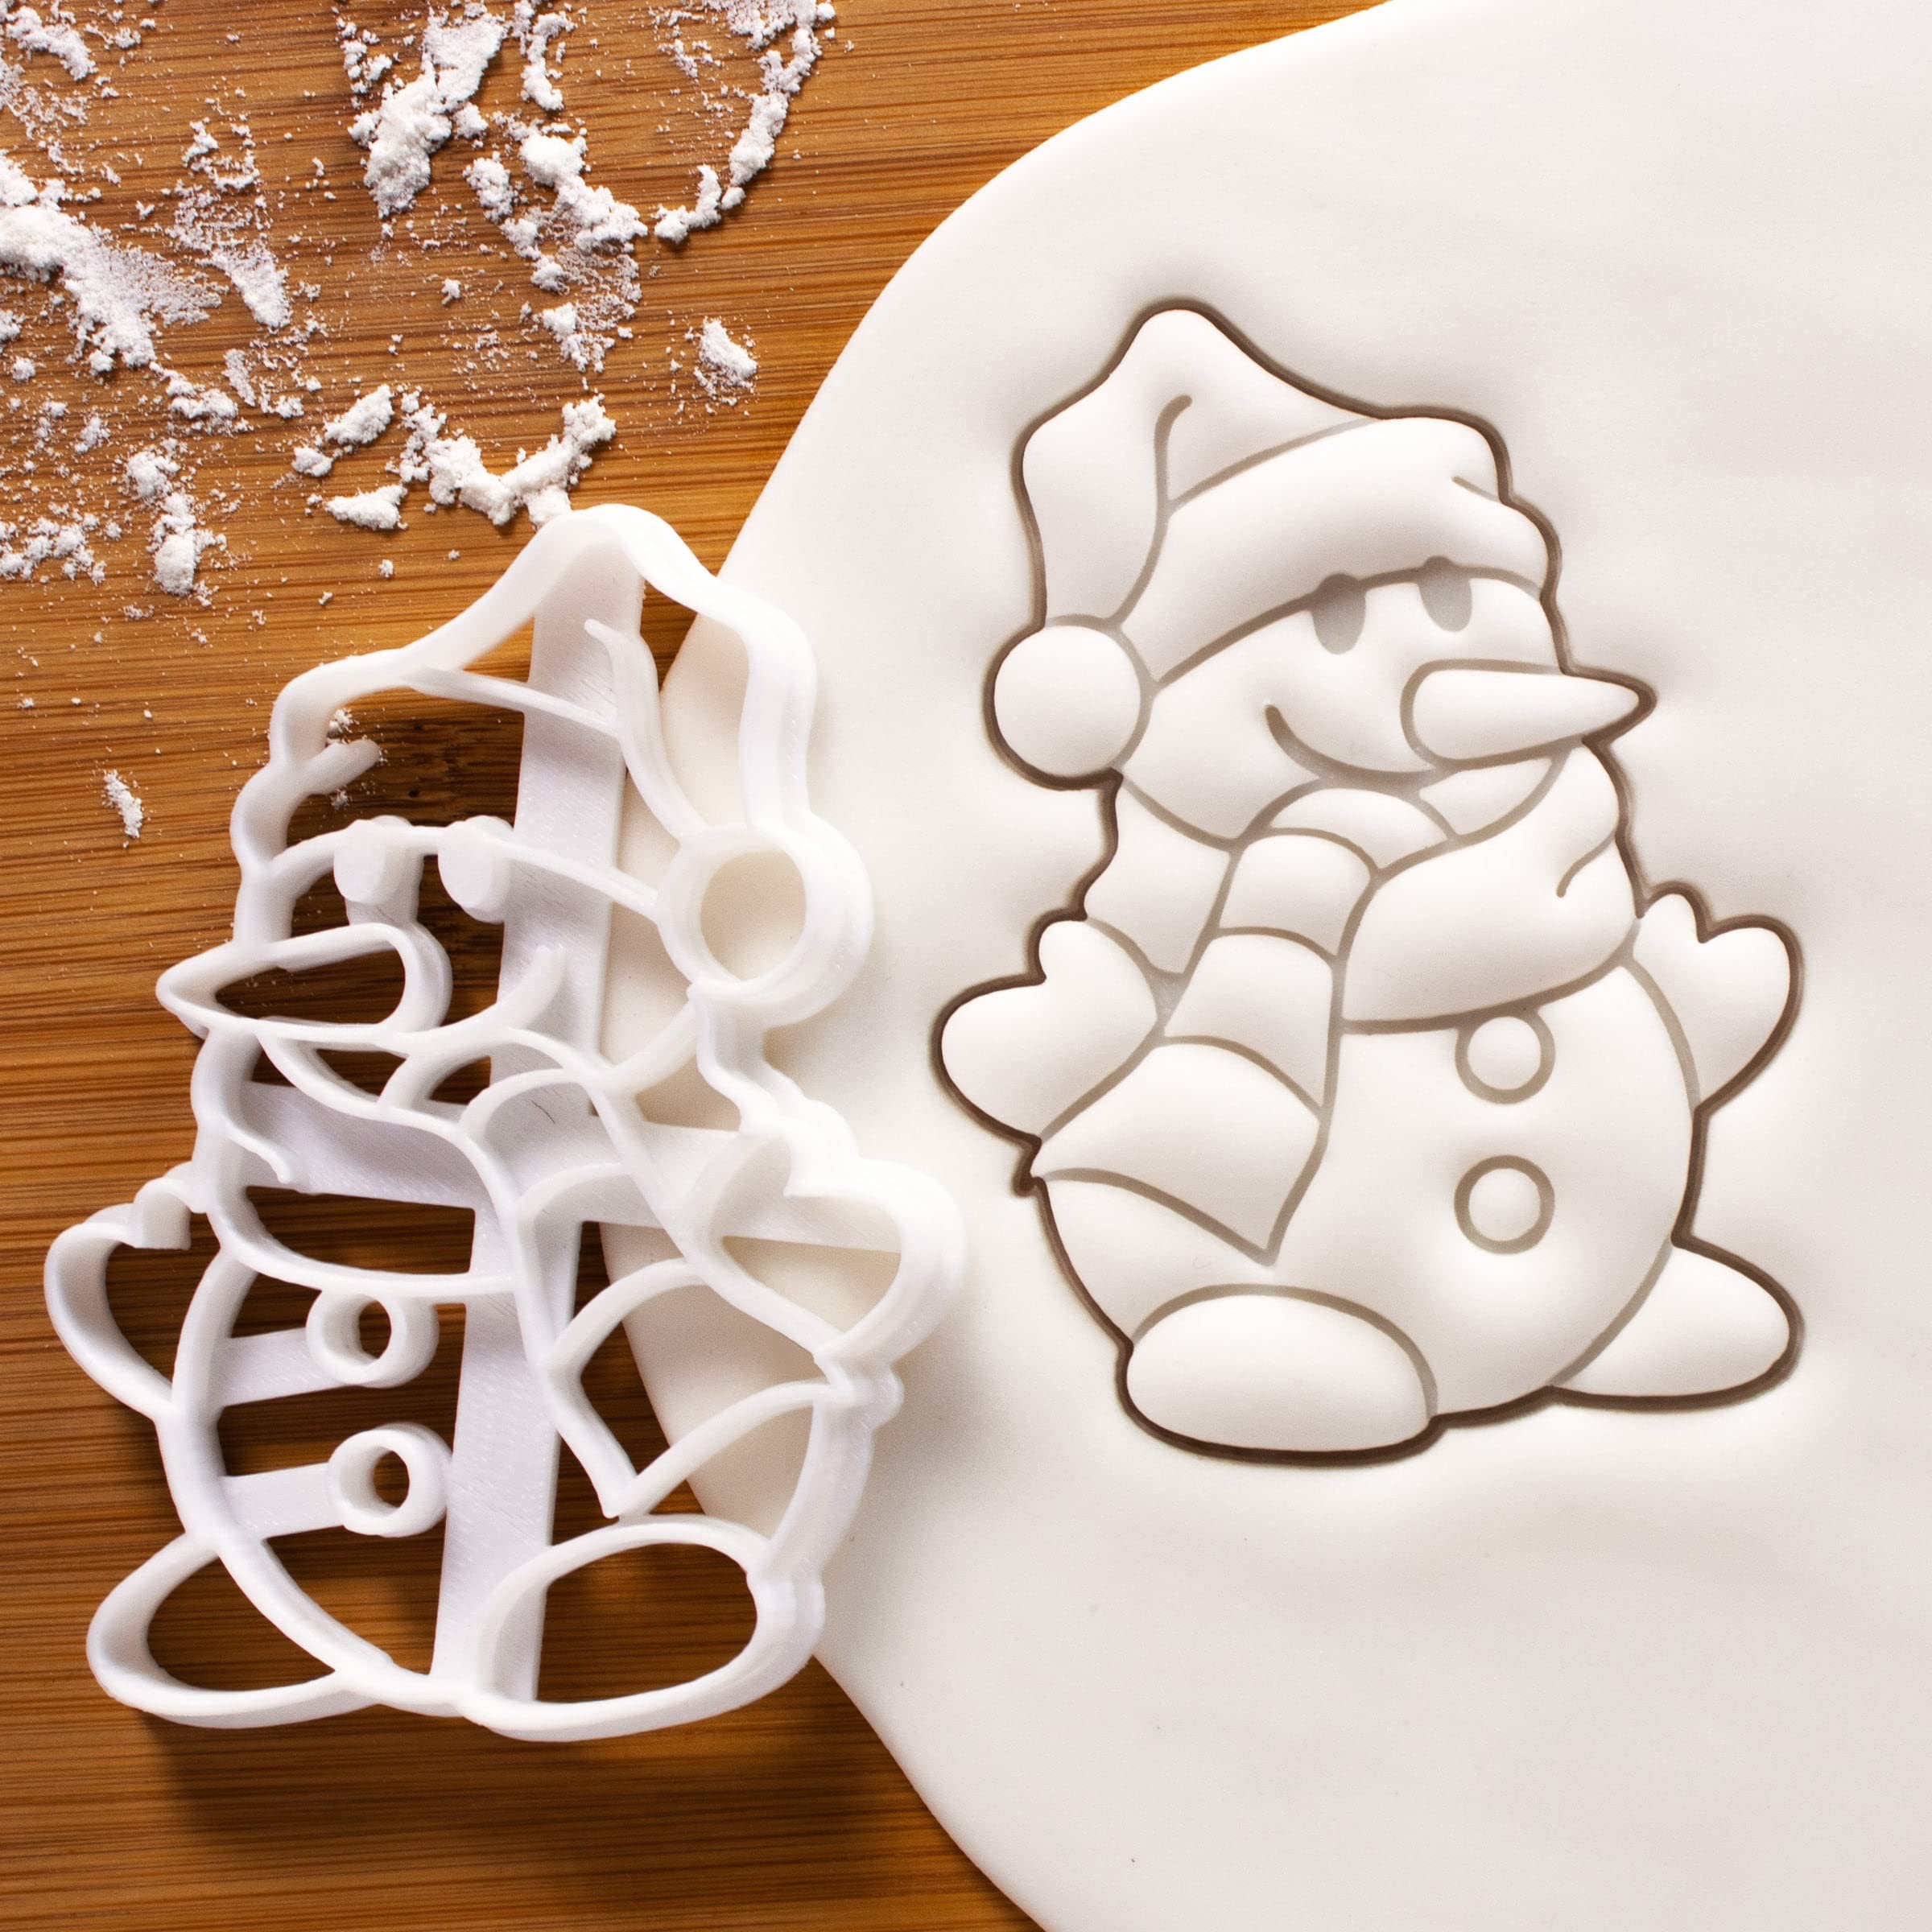 Set of 3 Christmas themed cookie cutters (Designs: Santa Claus, Snow Globe, and Snowman), 3 pieces - Bakerlogy